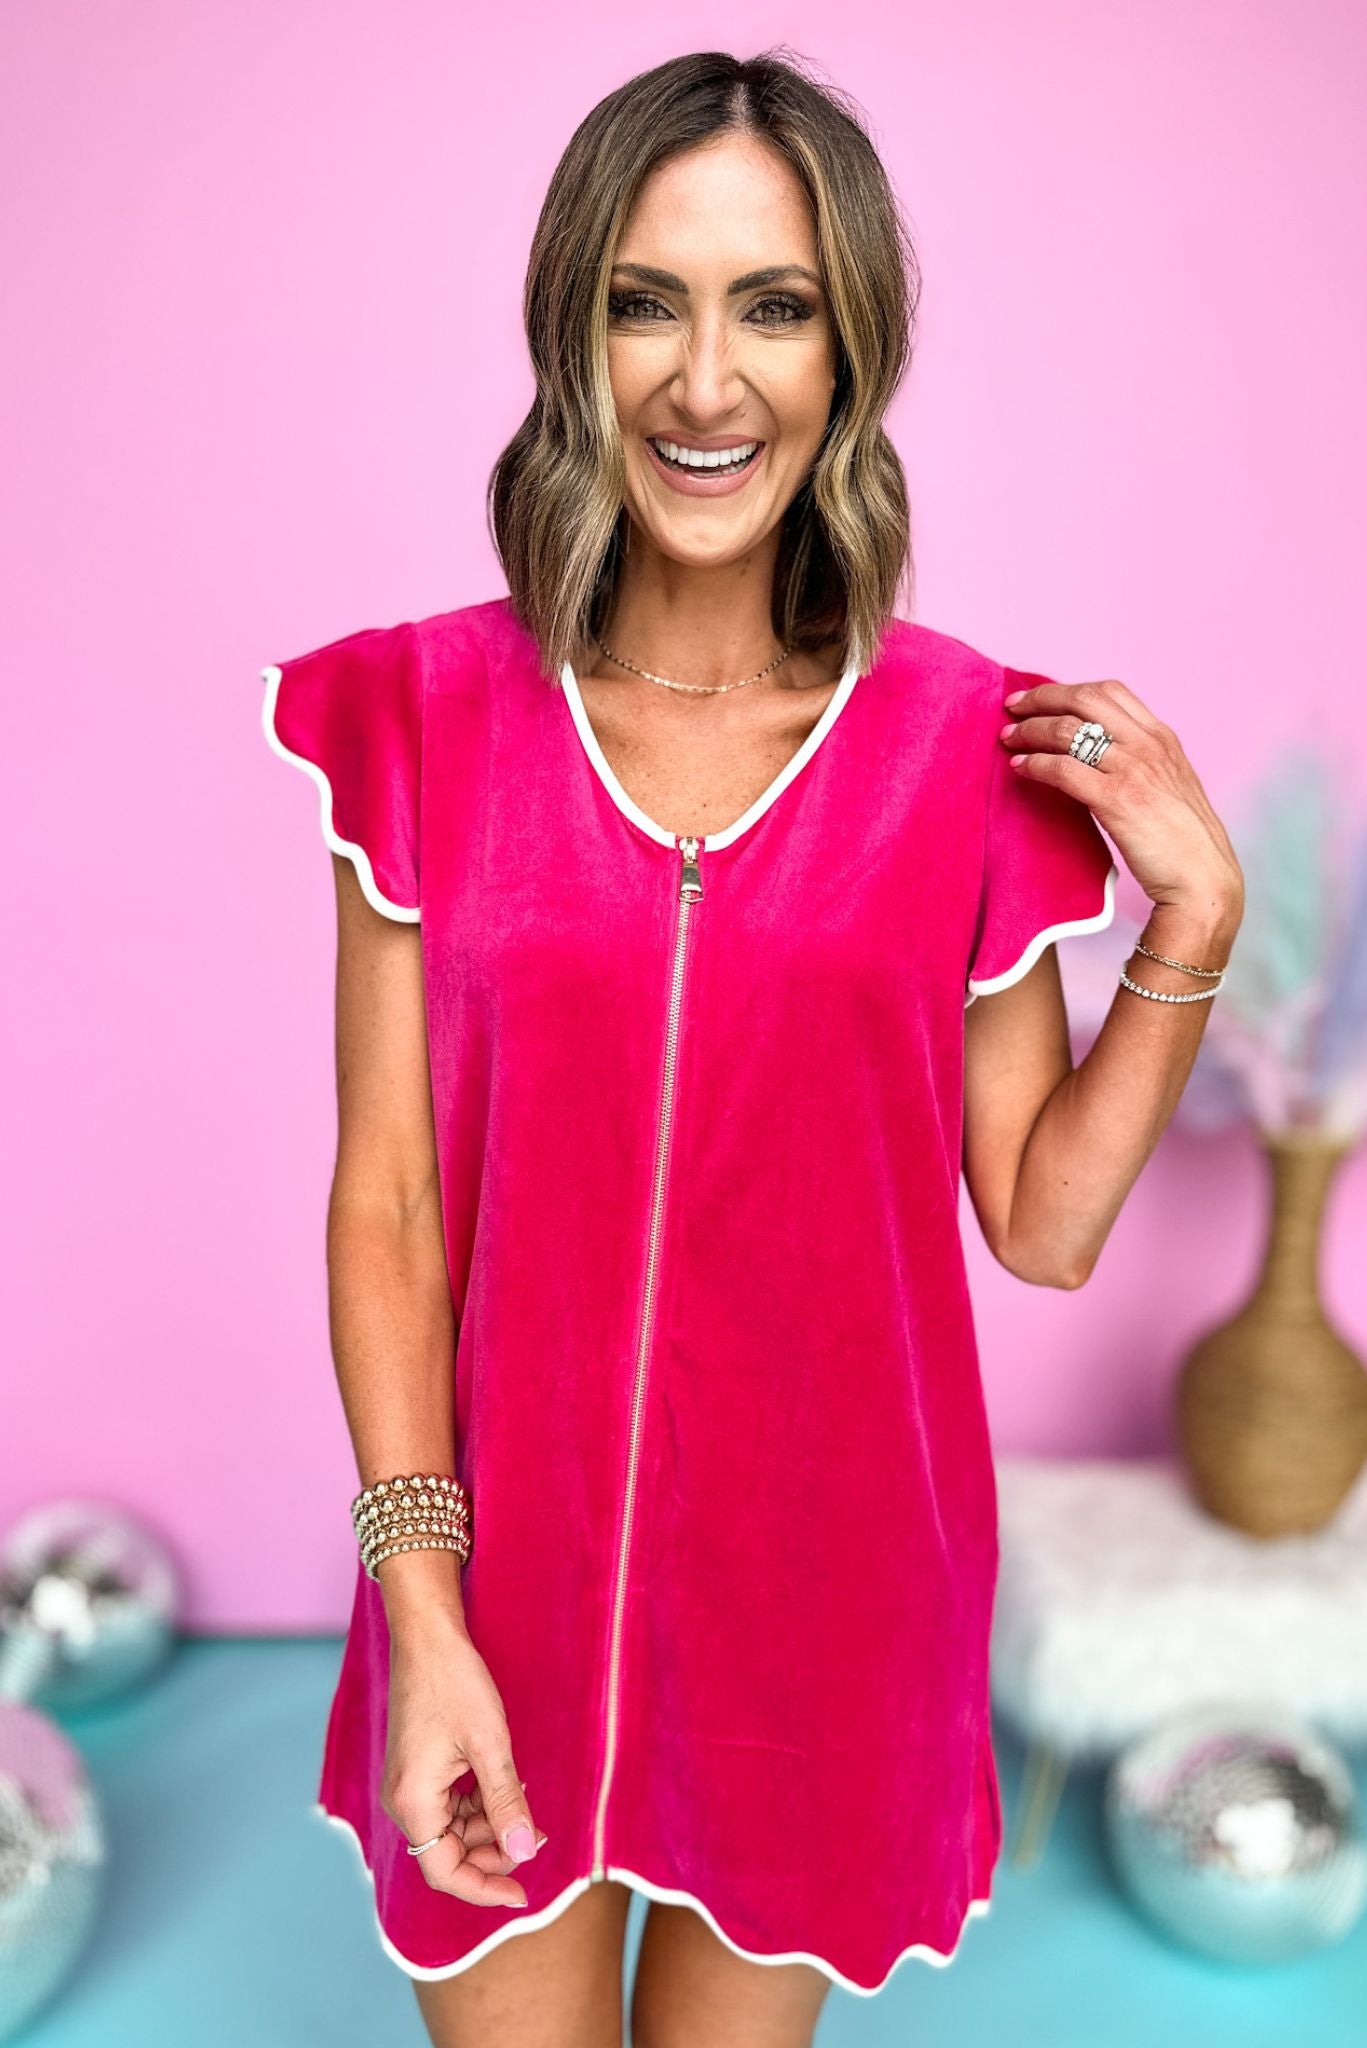 SSYS Hot Pink Get Ready Robe™, scallop sleeve, ruffle sleeve, everyday wear, gold zipper, mom style, white trim, robe, shop style your senses by mallory fitzsimmons